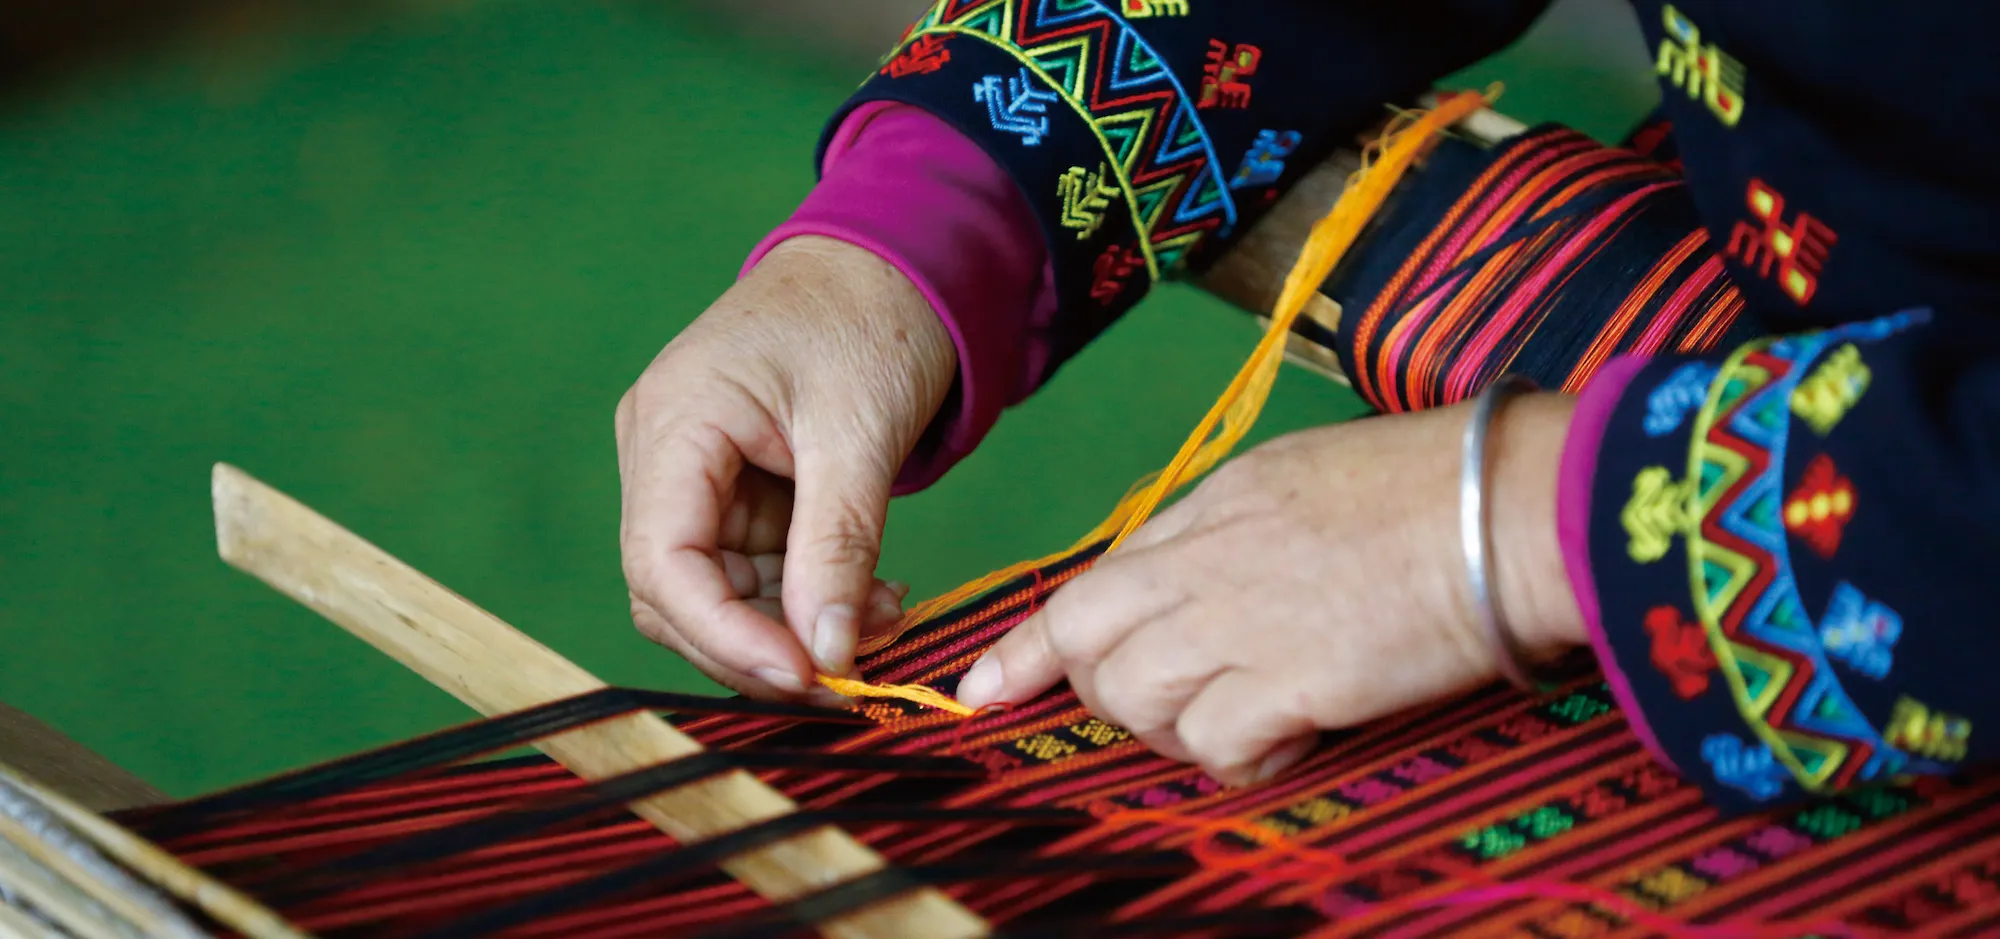 The Traditional Li Weaving Textile Technique Still in Use Today